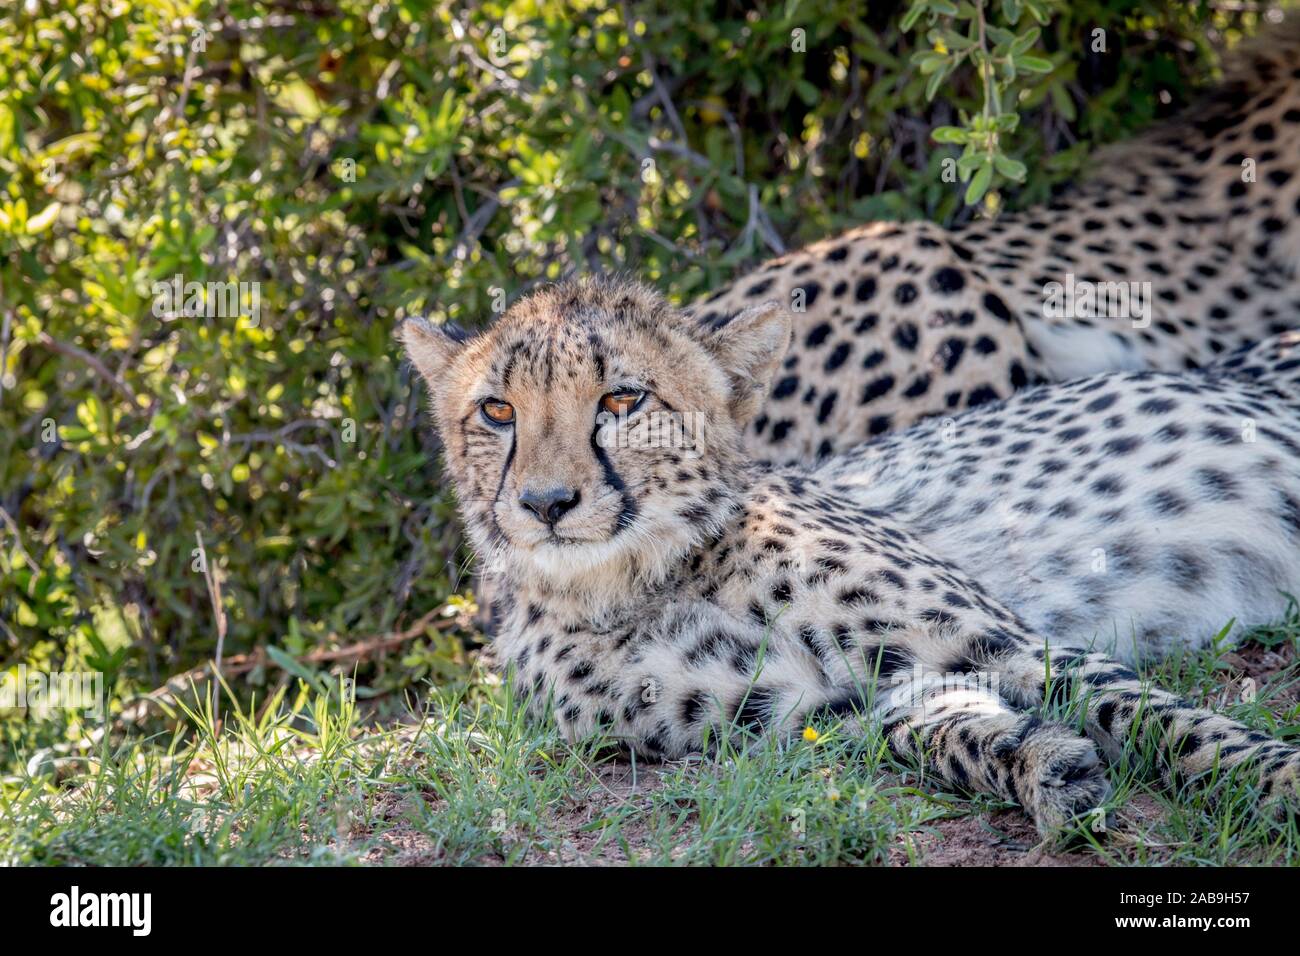 Cheetah laying down and starring in the Welgevonden game reserve, South Africa. Stock Photo